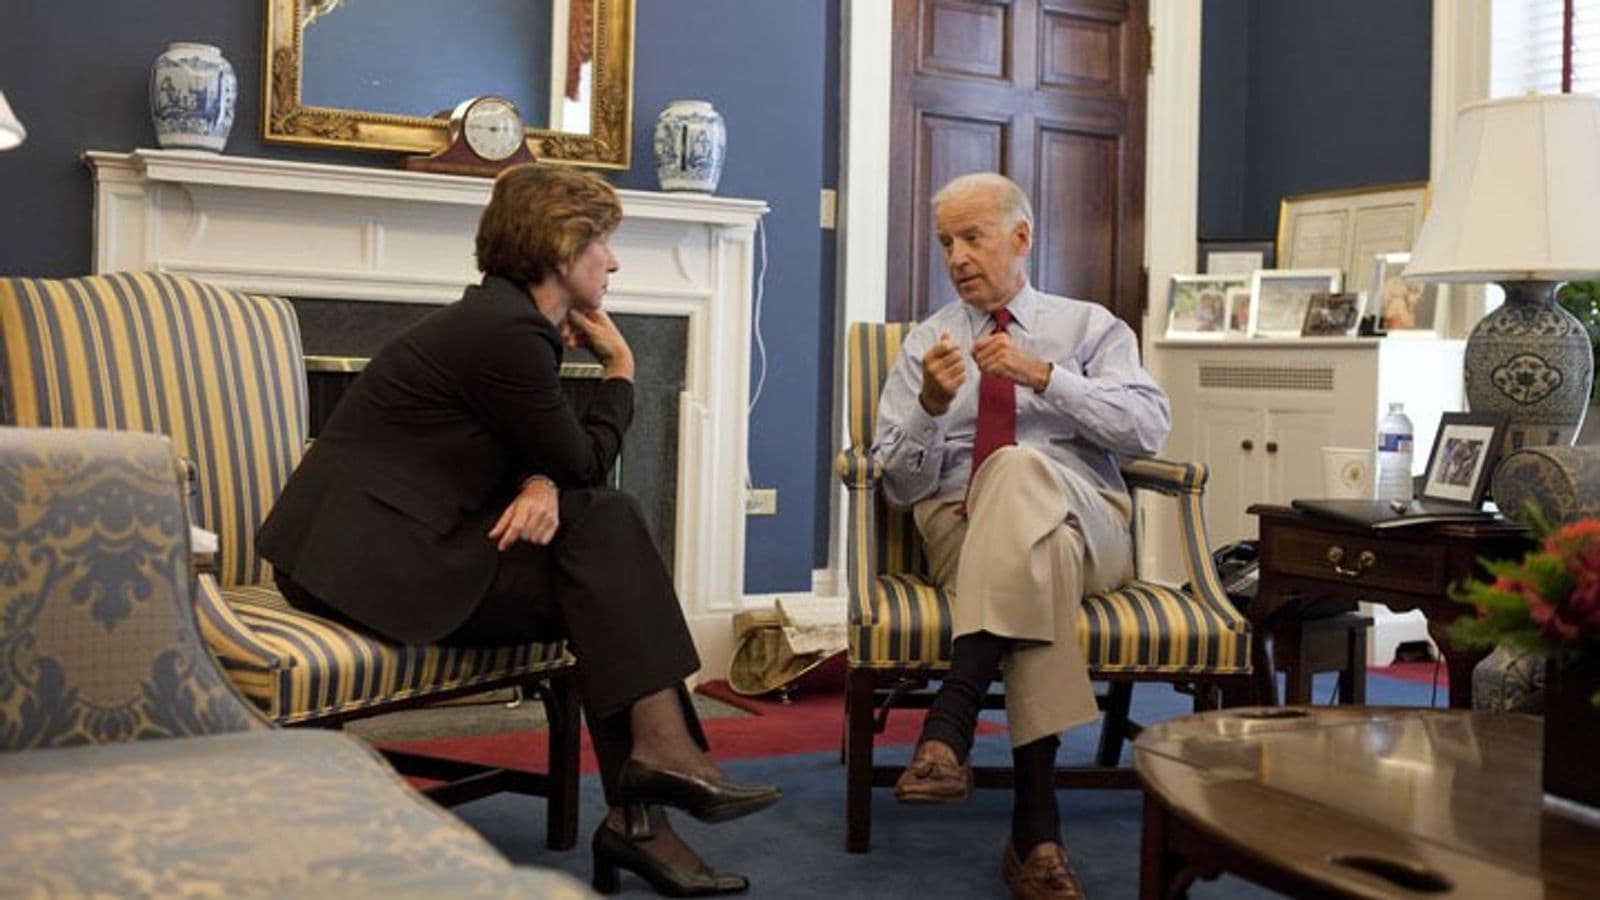 Randi Weingarten and the White House with then Vice President Joe Biden in 2011.